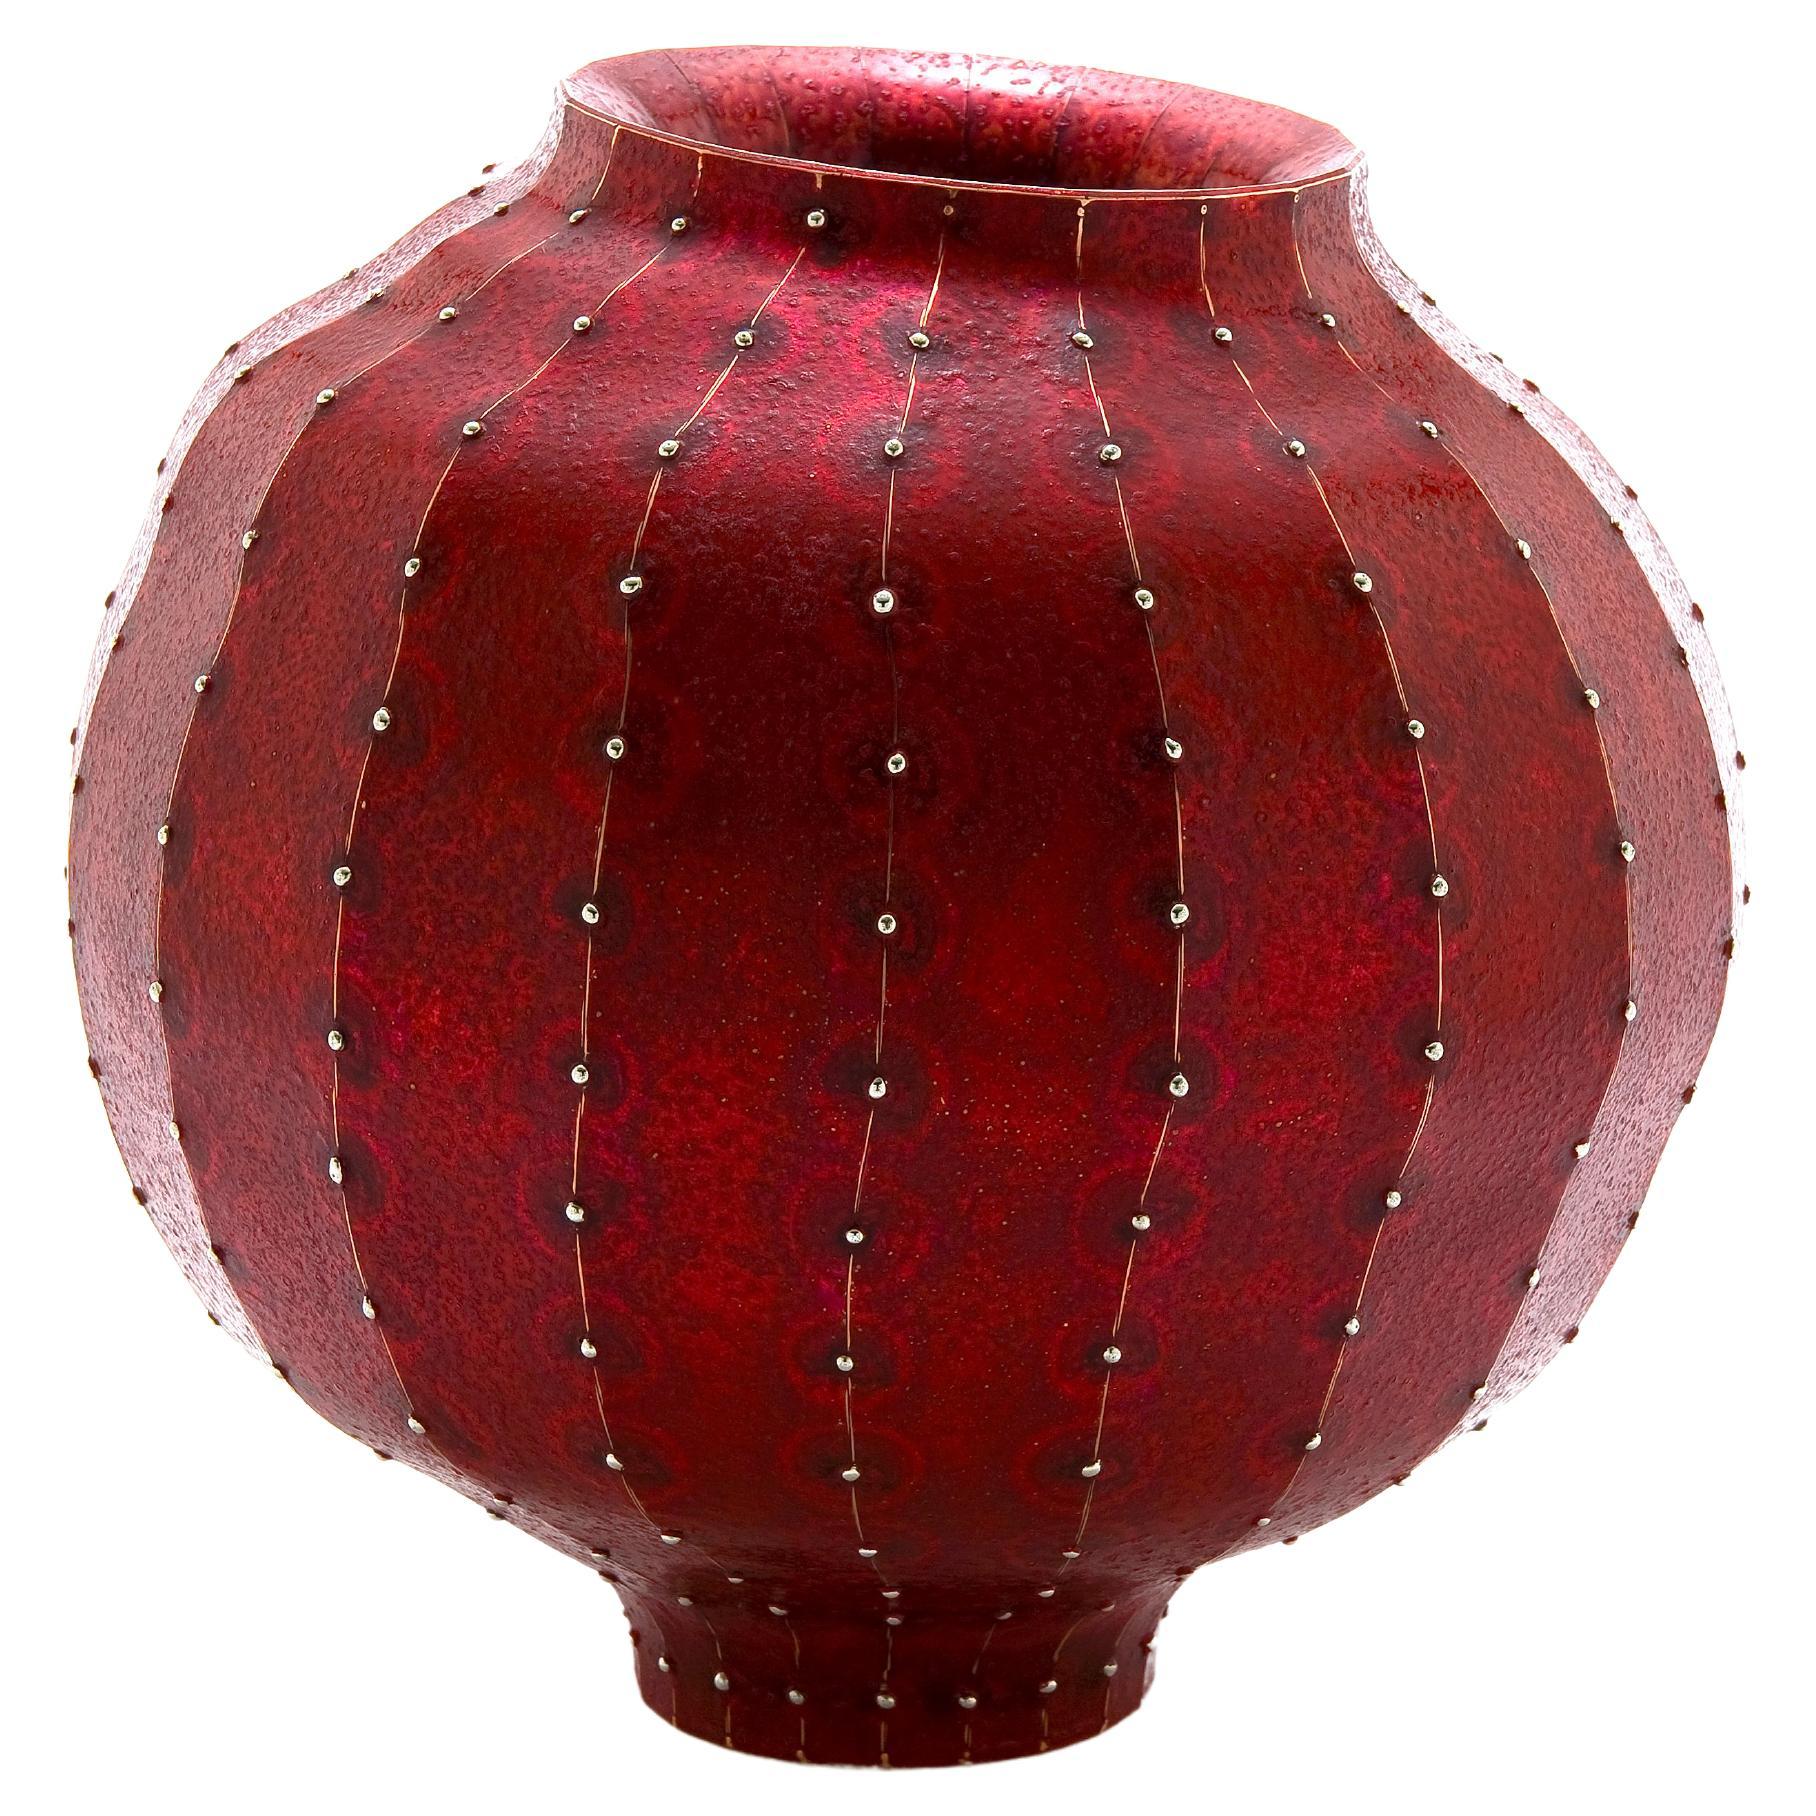 21th Century Sculptural Vase "Transition Red" by Jaiik Lee Copper Fine Silver